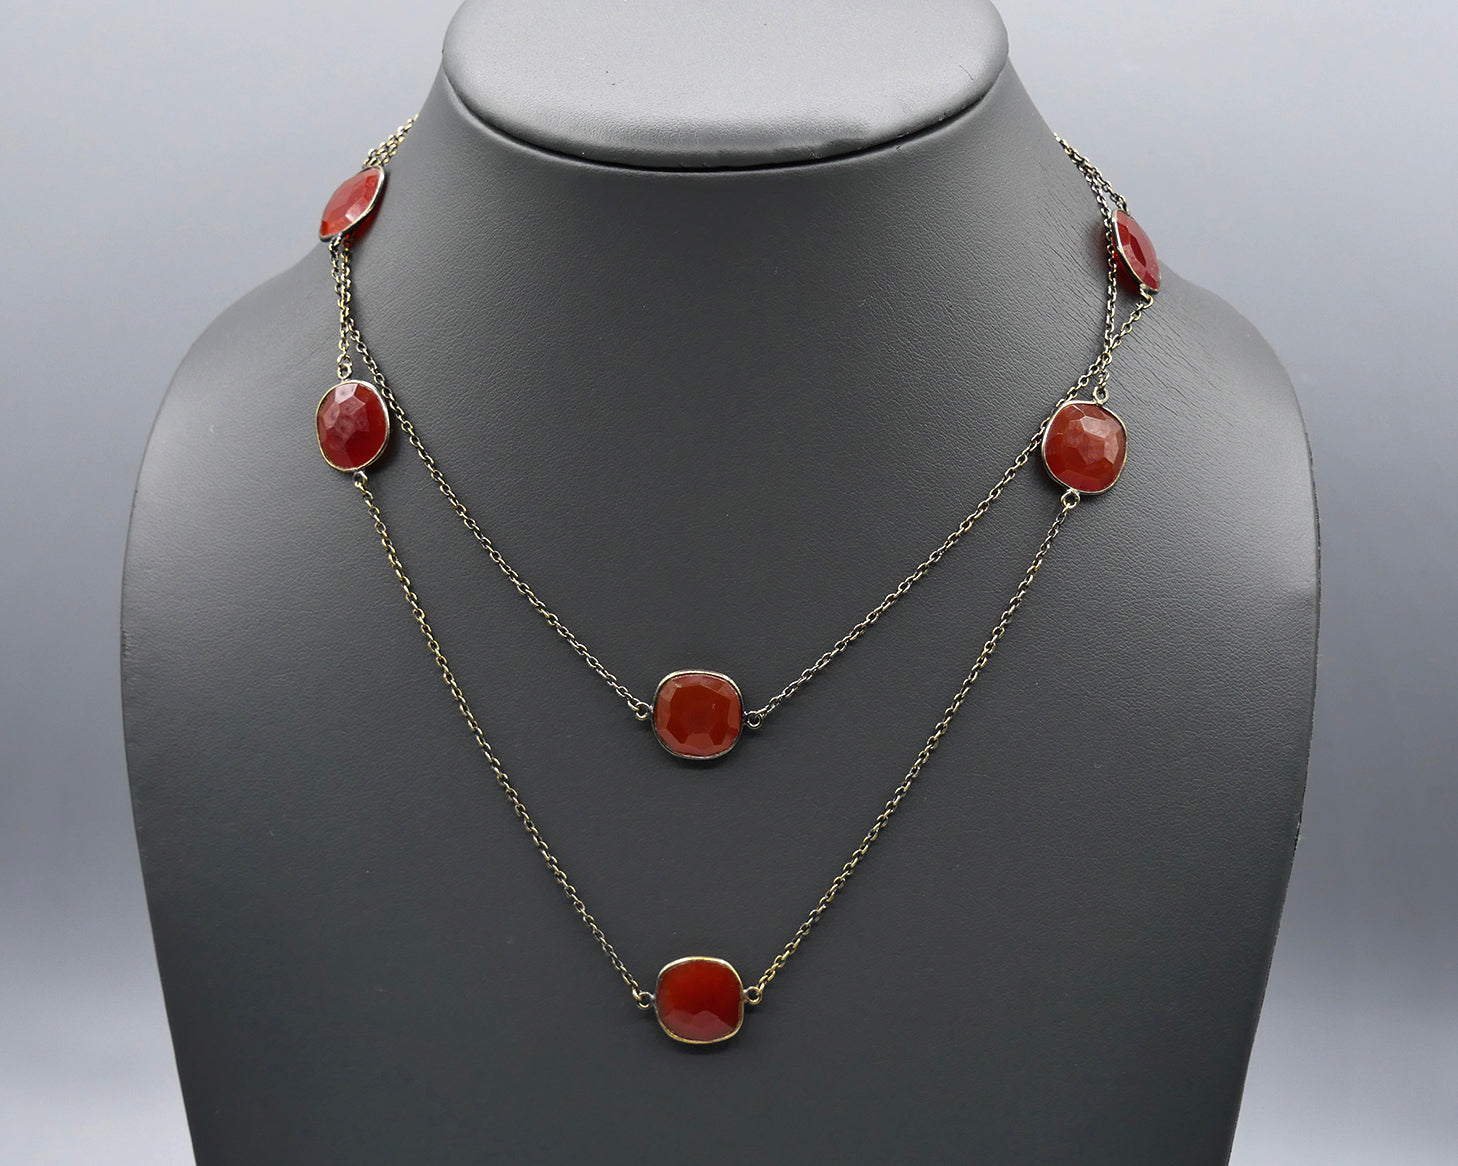 Chain Gang- Carnelian Small Stone Necklace and Large Stone Necklace